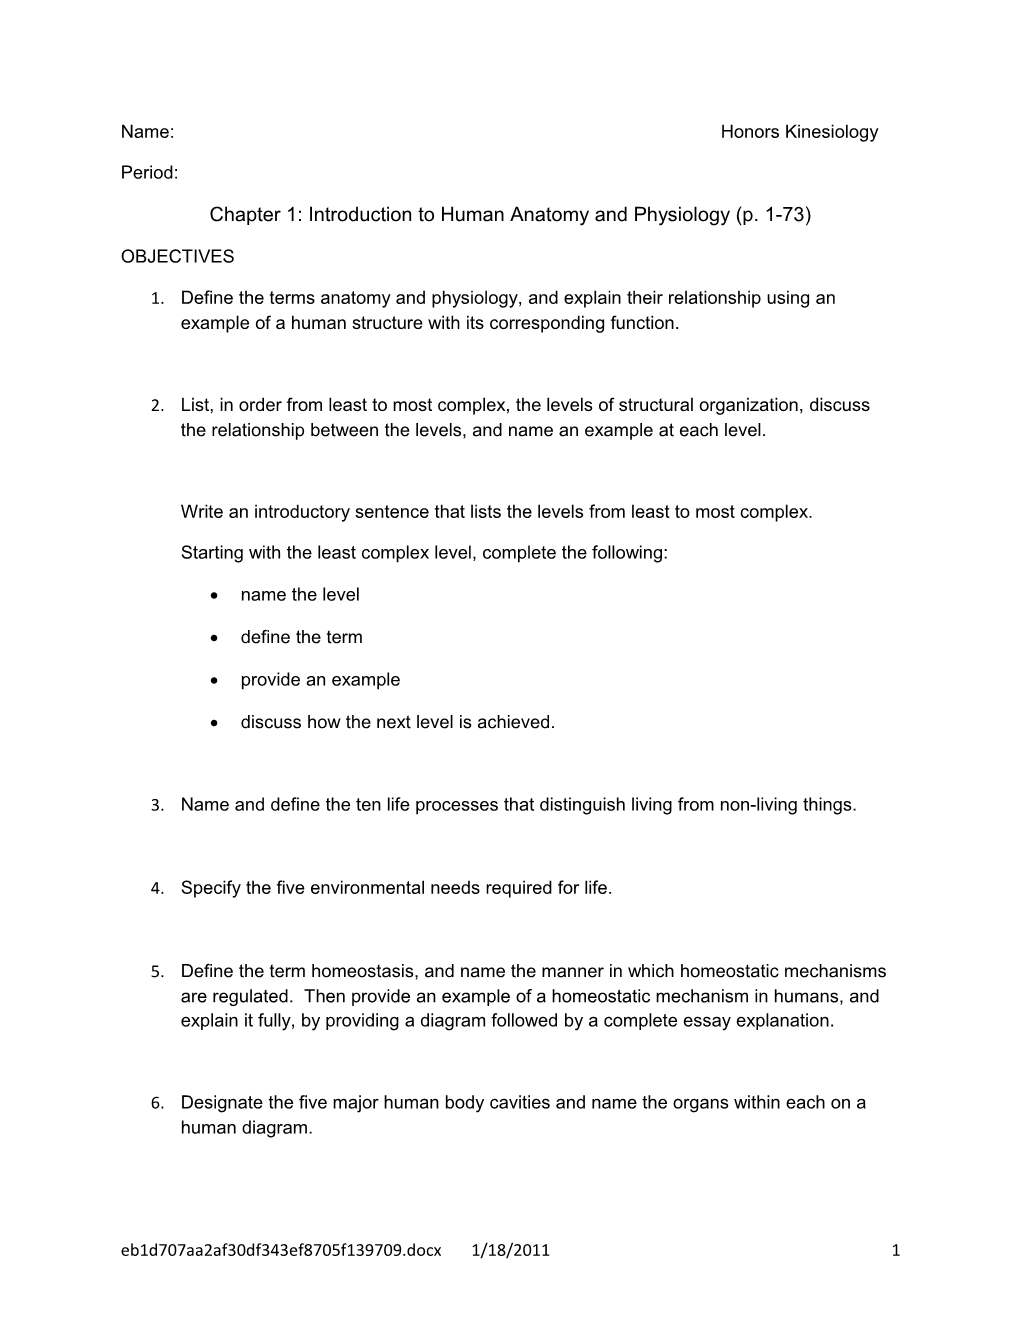 Chapter 1: Introduction to Human Anatomy and Physiology (P. 1-73)